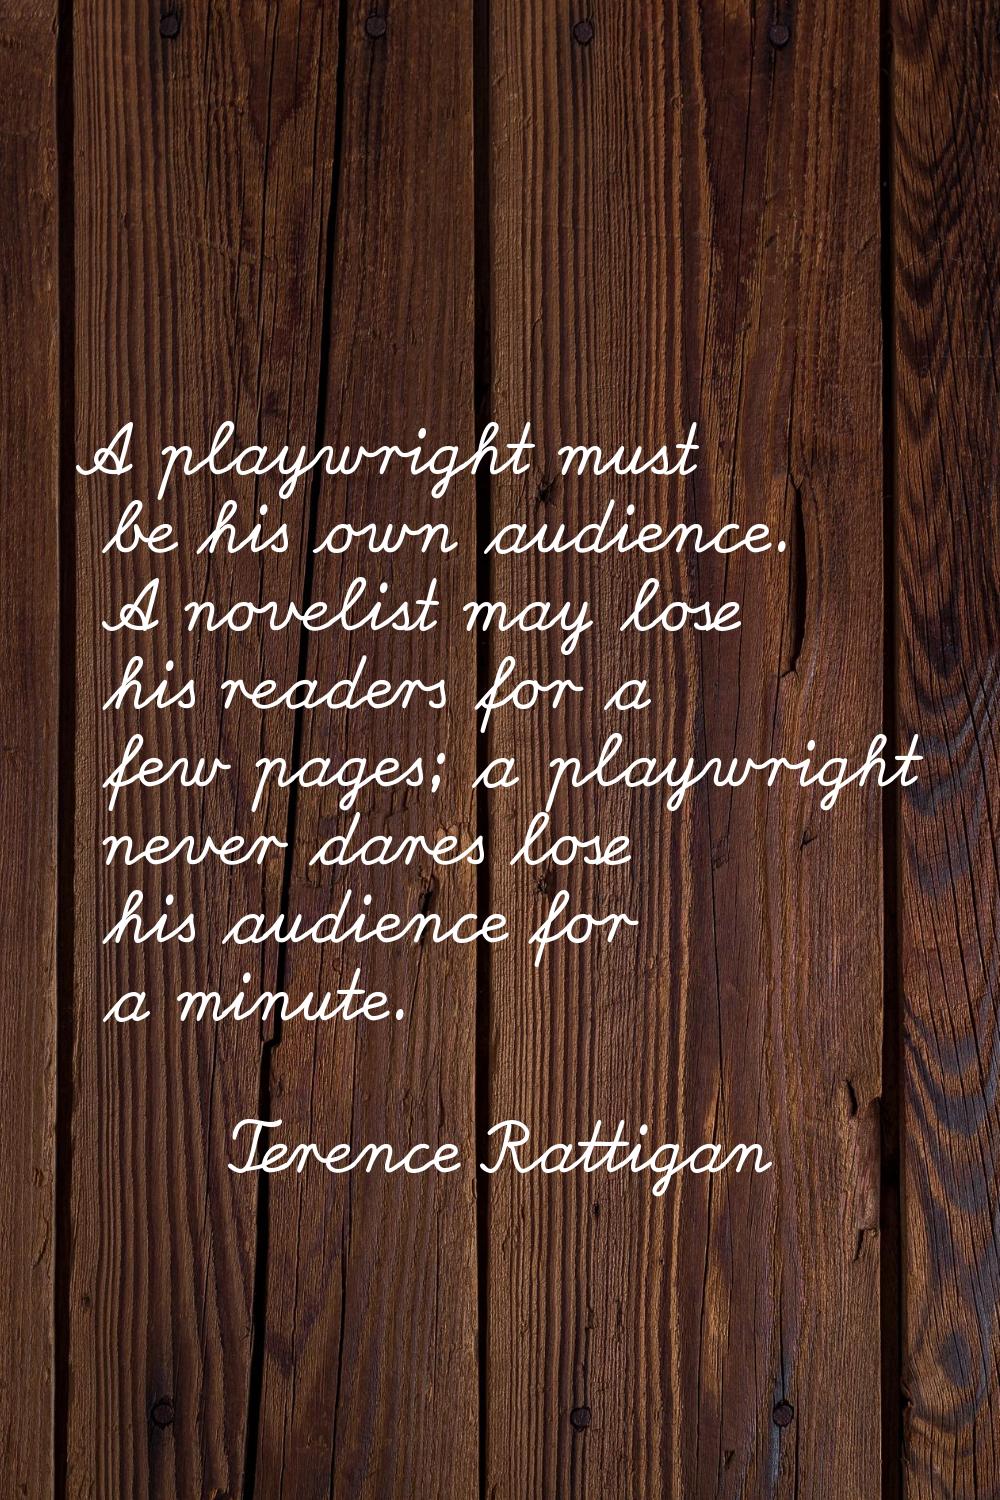 A playwright must be his own audience. A novelist may lose his readers for a few pages; a playwrigh